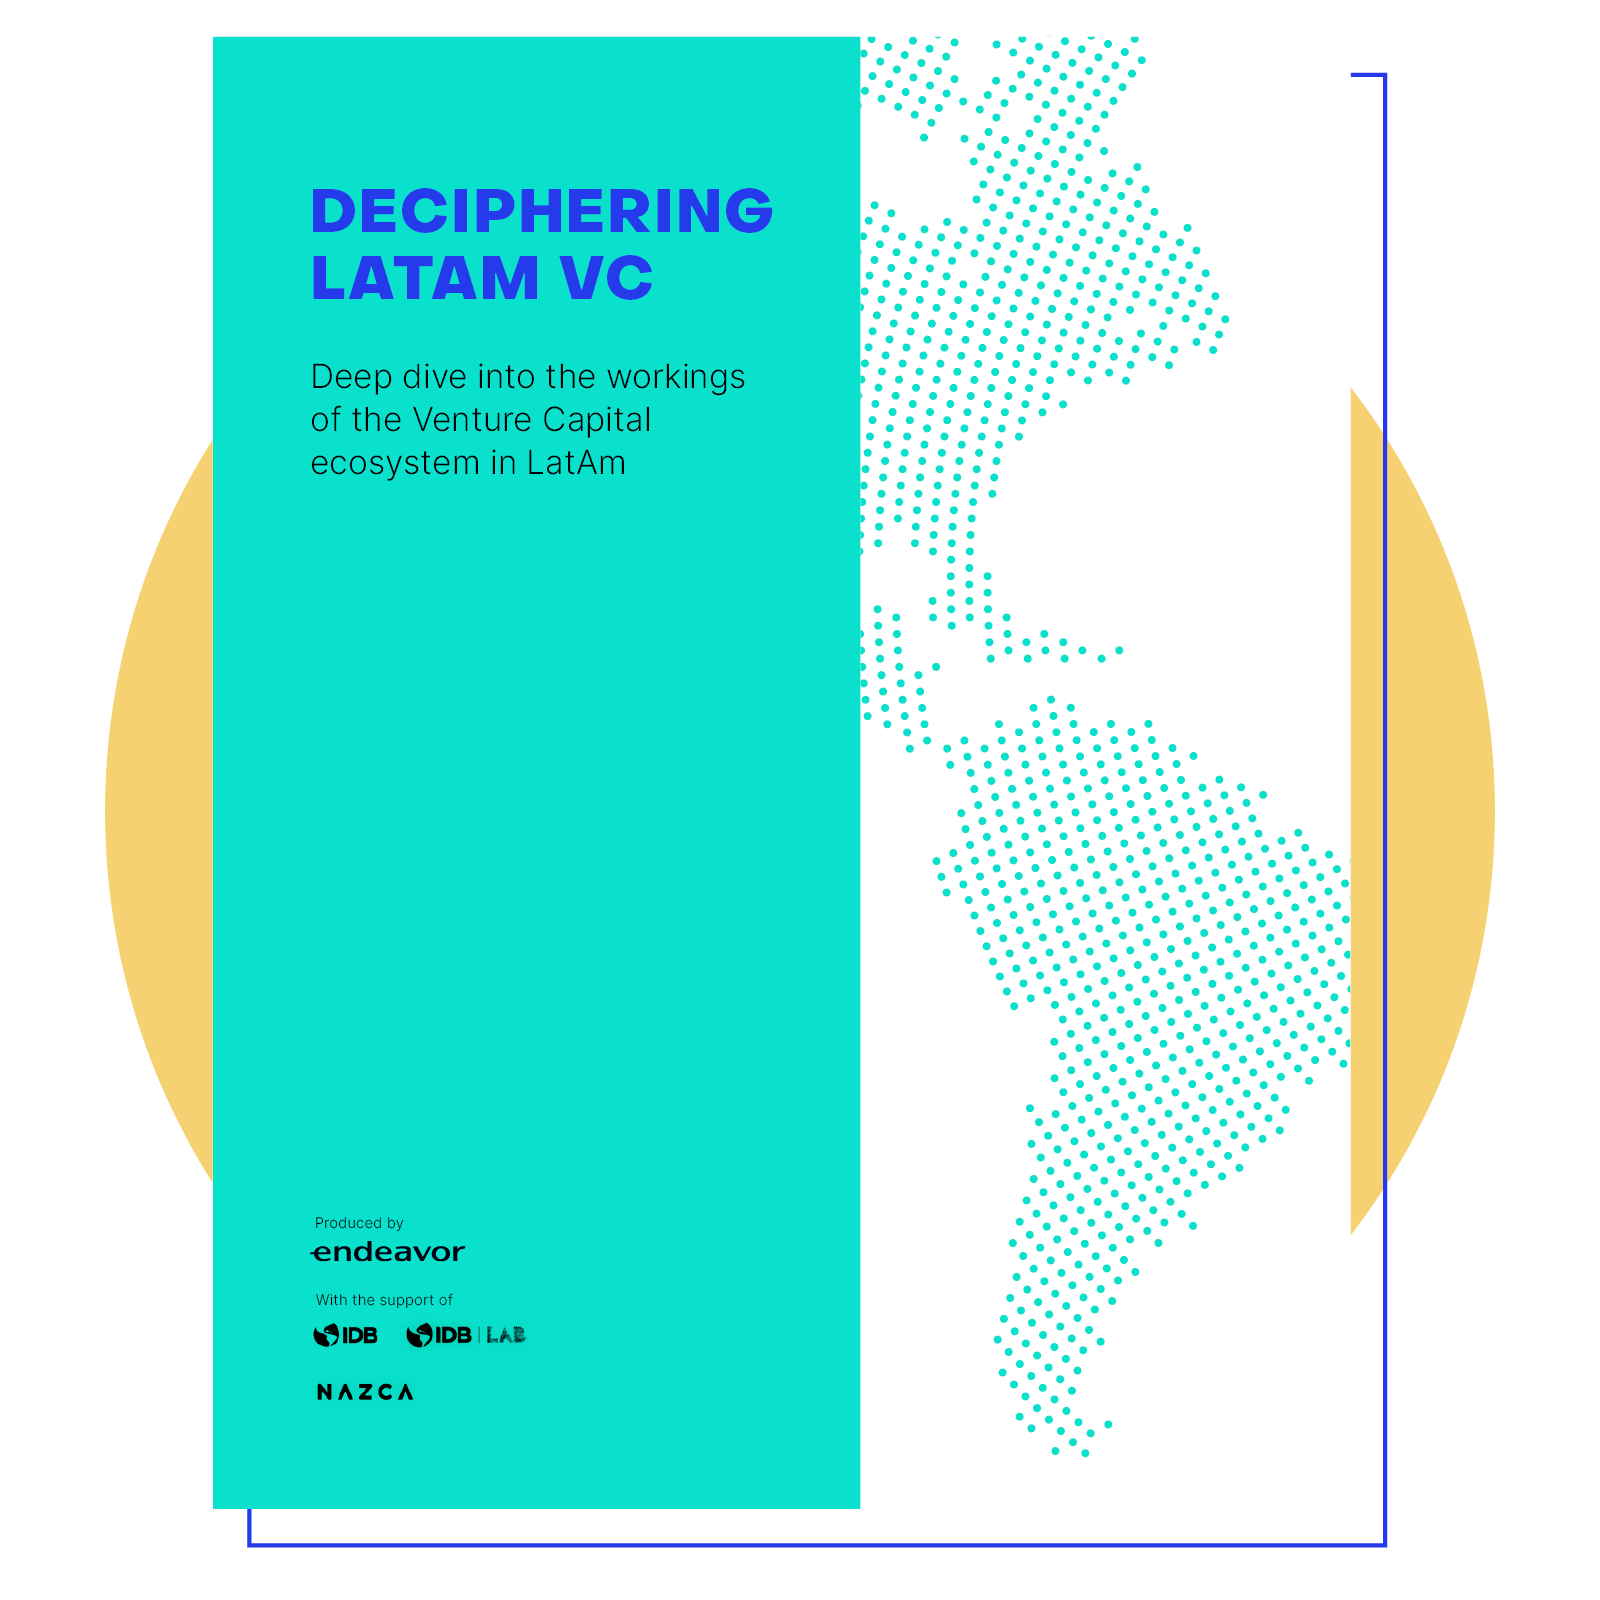 Deciphering LatAm VC: Deep dive into the workings of the Venture Capital ecosystem in LatAm